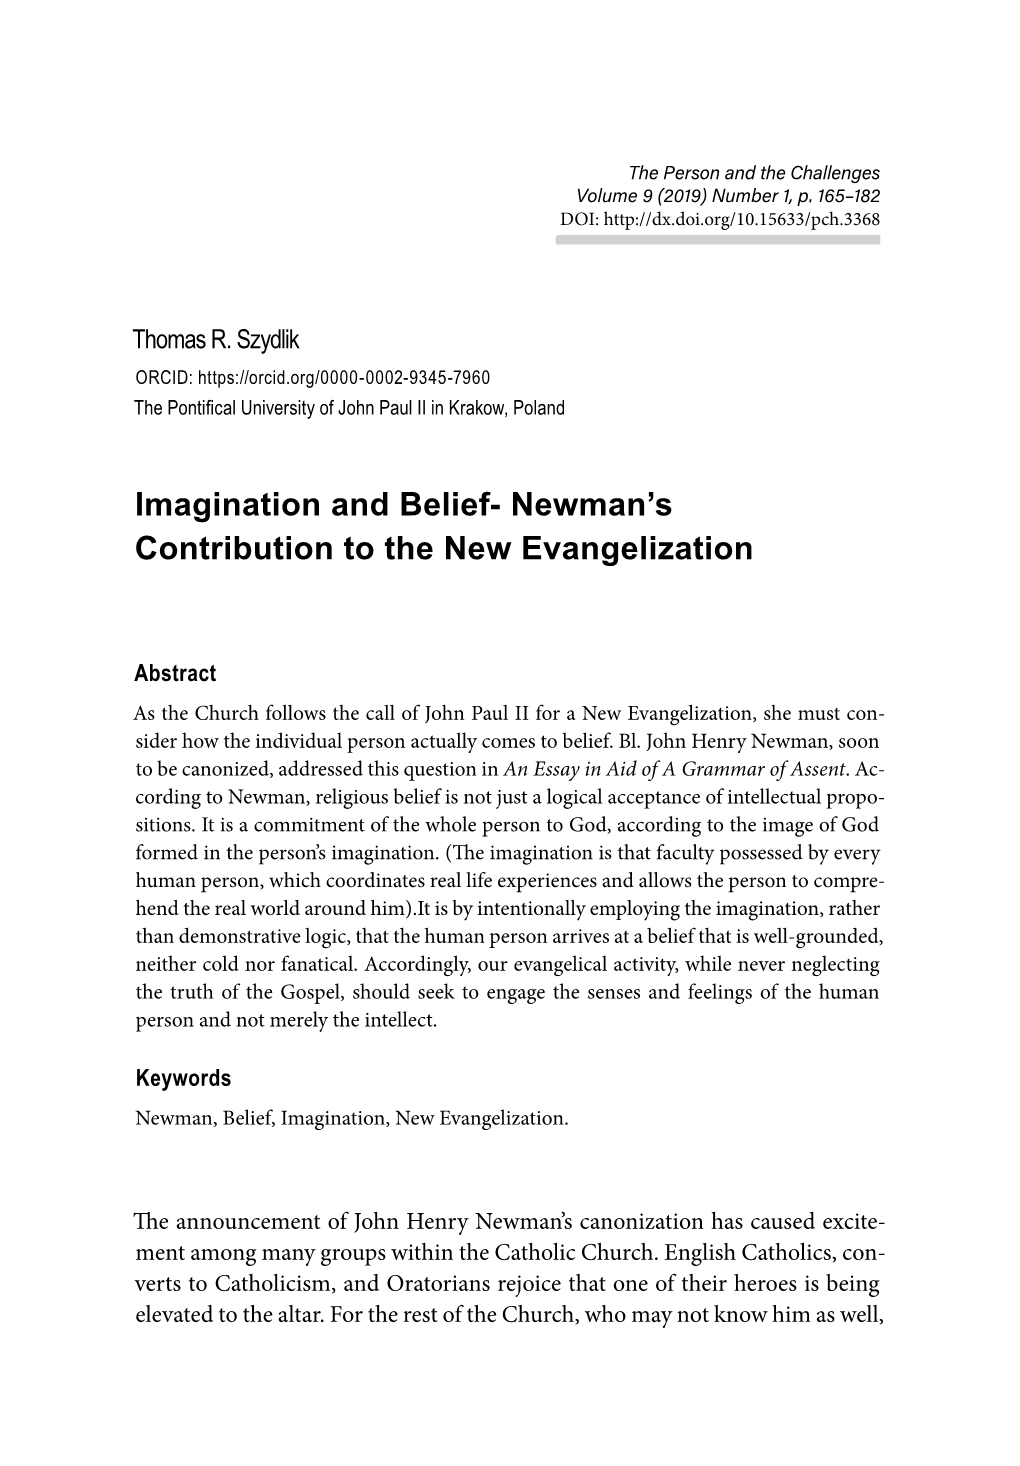 Imagination and Belief- Newman’S Contribution to the New Evangelization